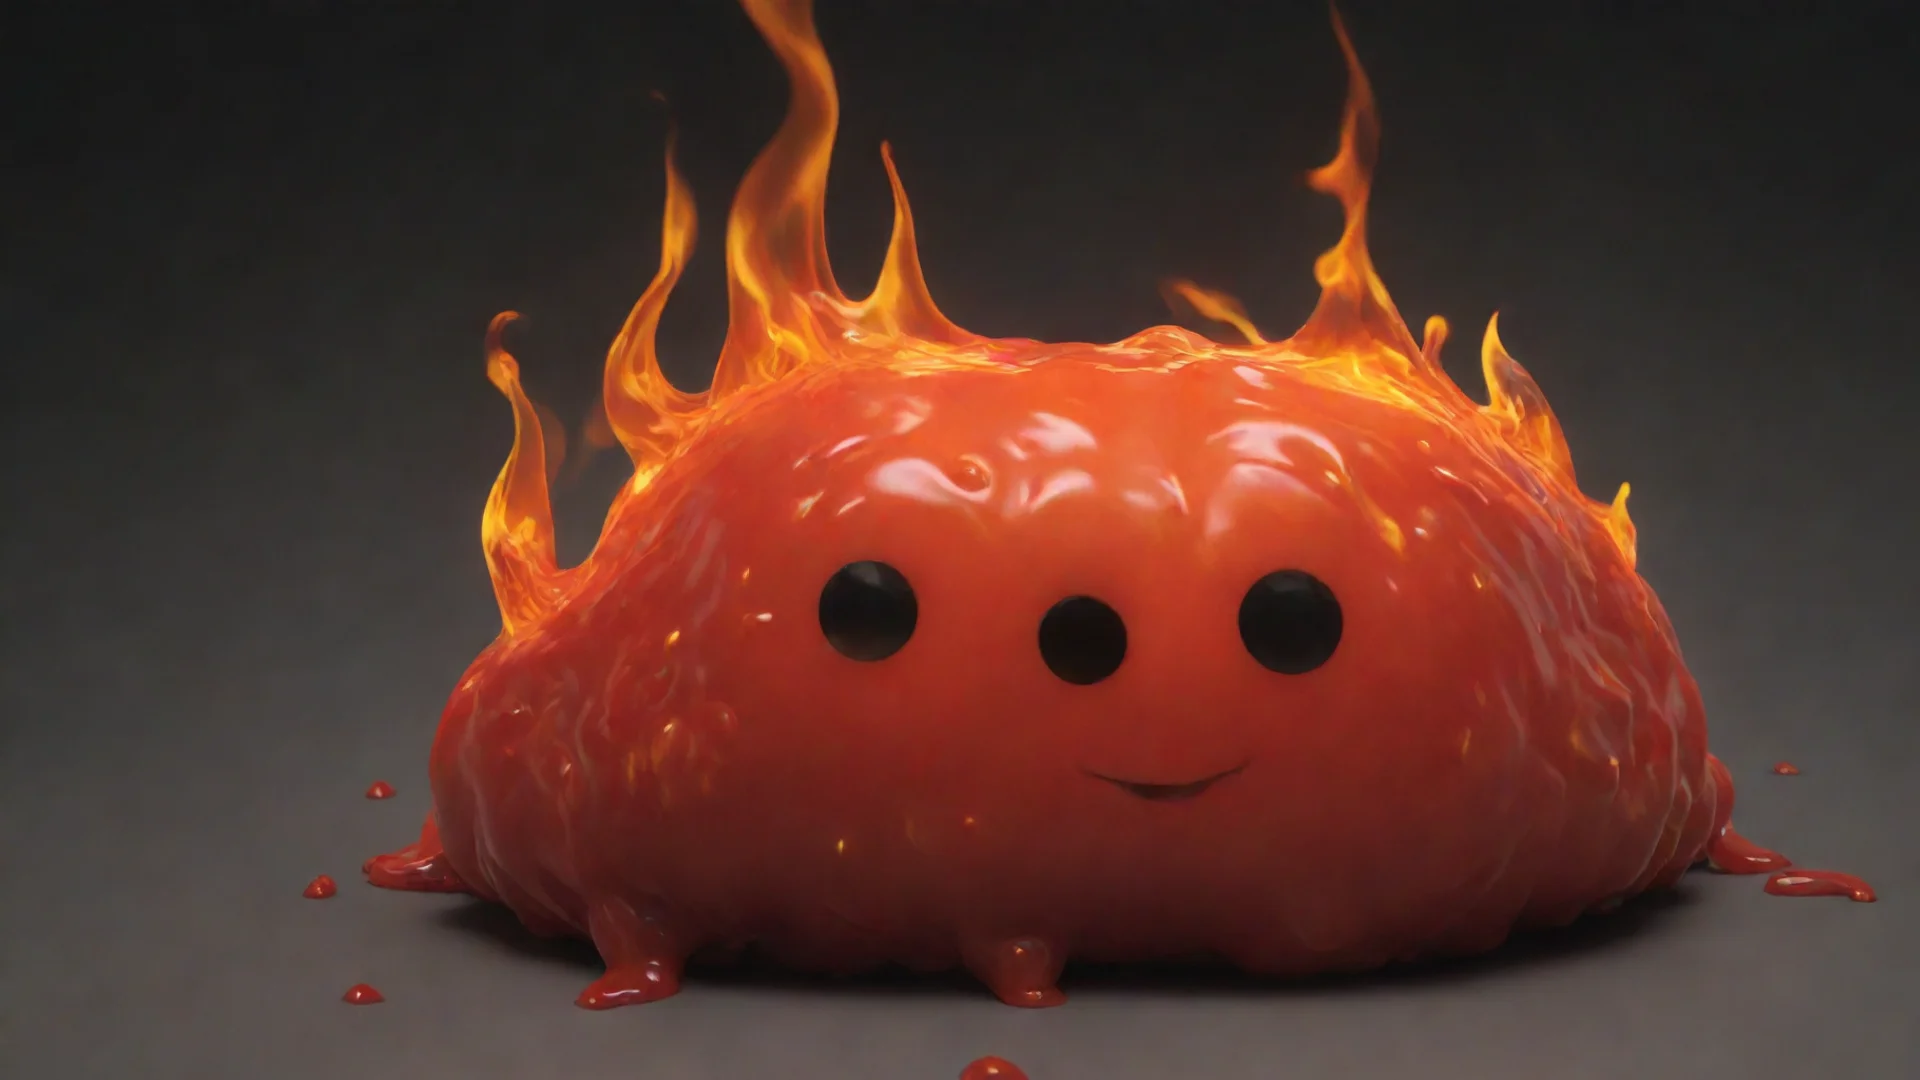 aiamazing fire slime awesome portrait 2 wide